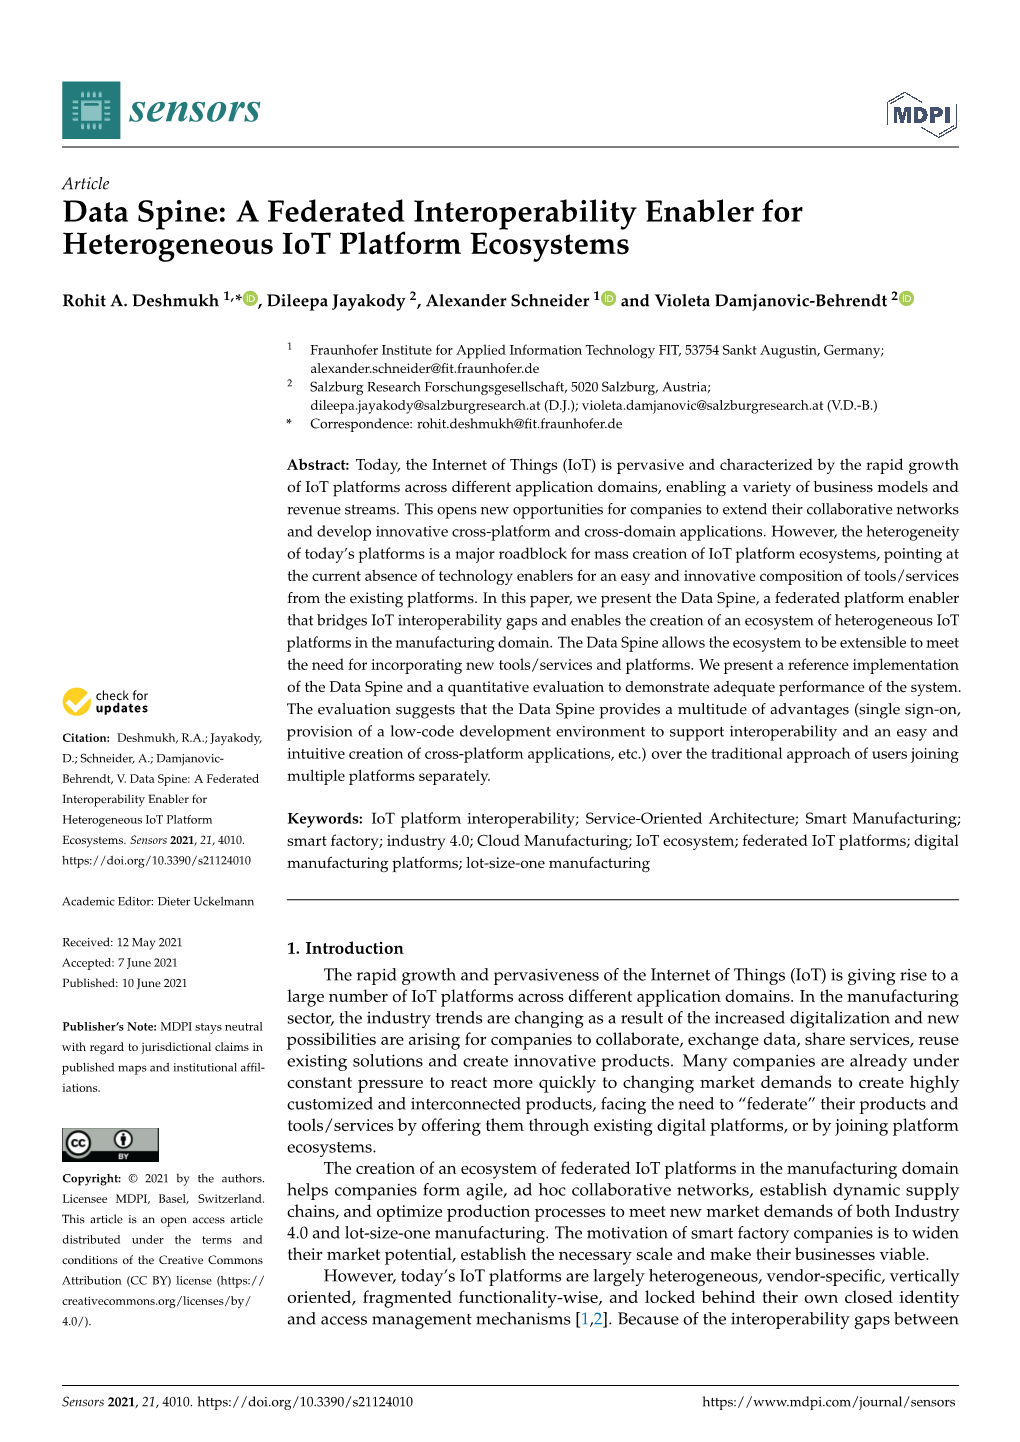 A Federated Interoperability Enabler for Heterogeneous Iot Platform Ecosystems